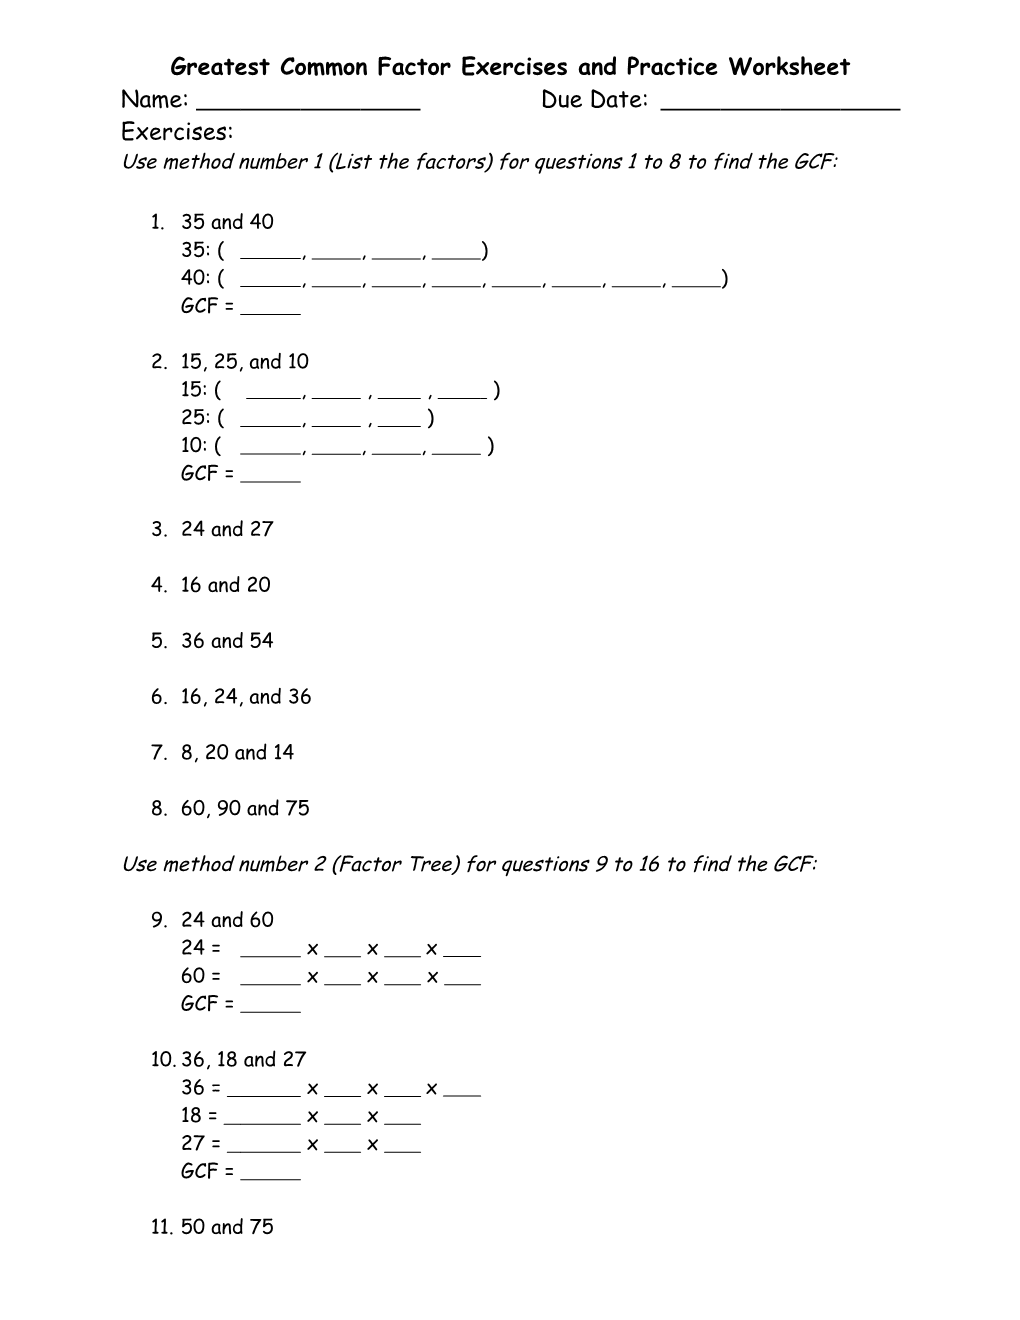 Greatest Common Factor Exercises and Practice Worksheet